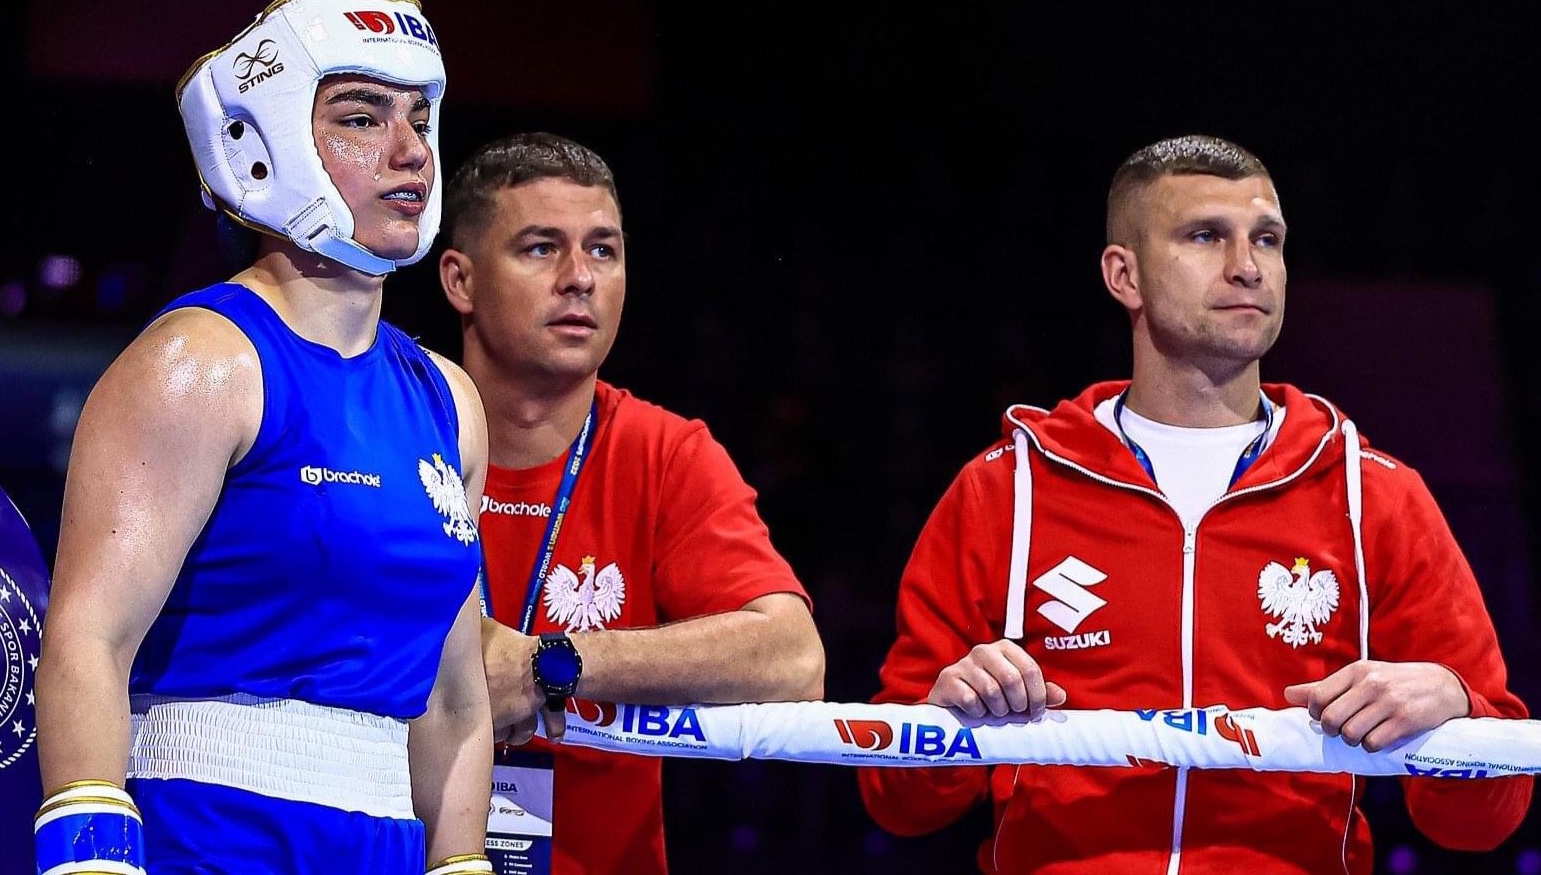 Polish woman in the final of the World Boxing Championships. Oliwia Toborek has achieved silver medal